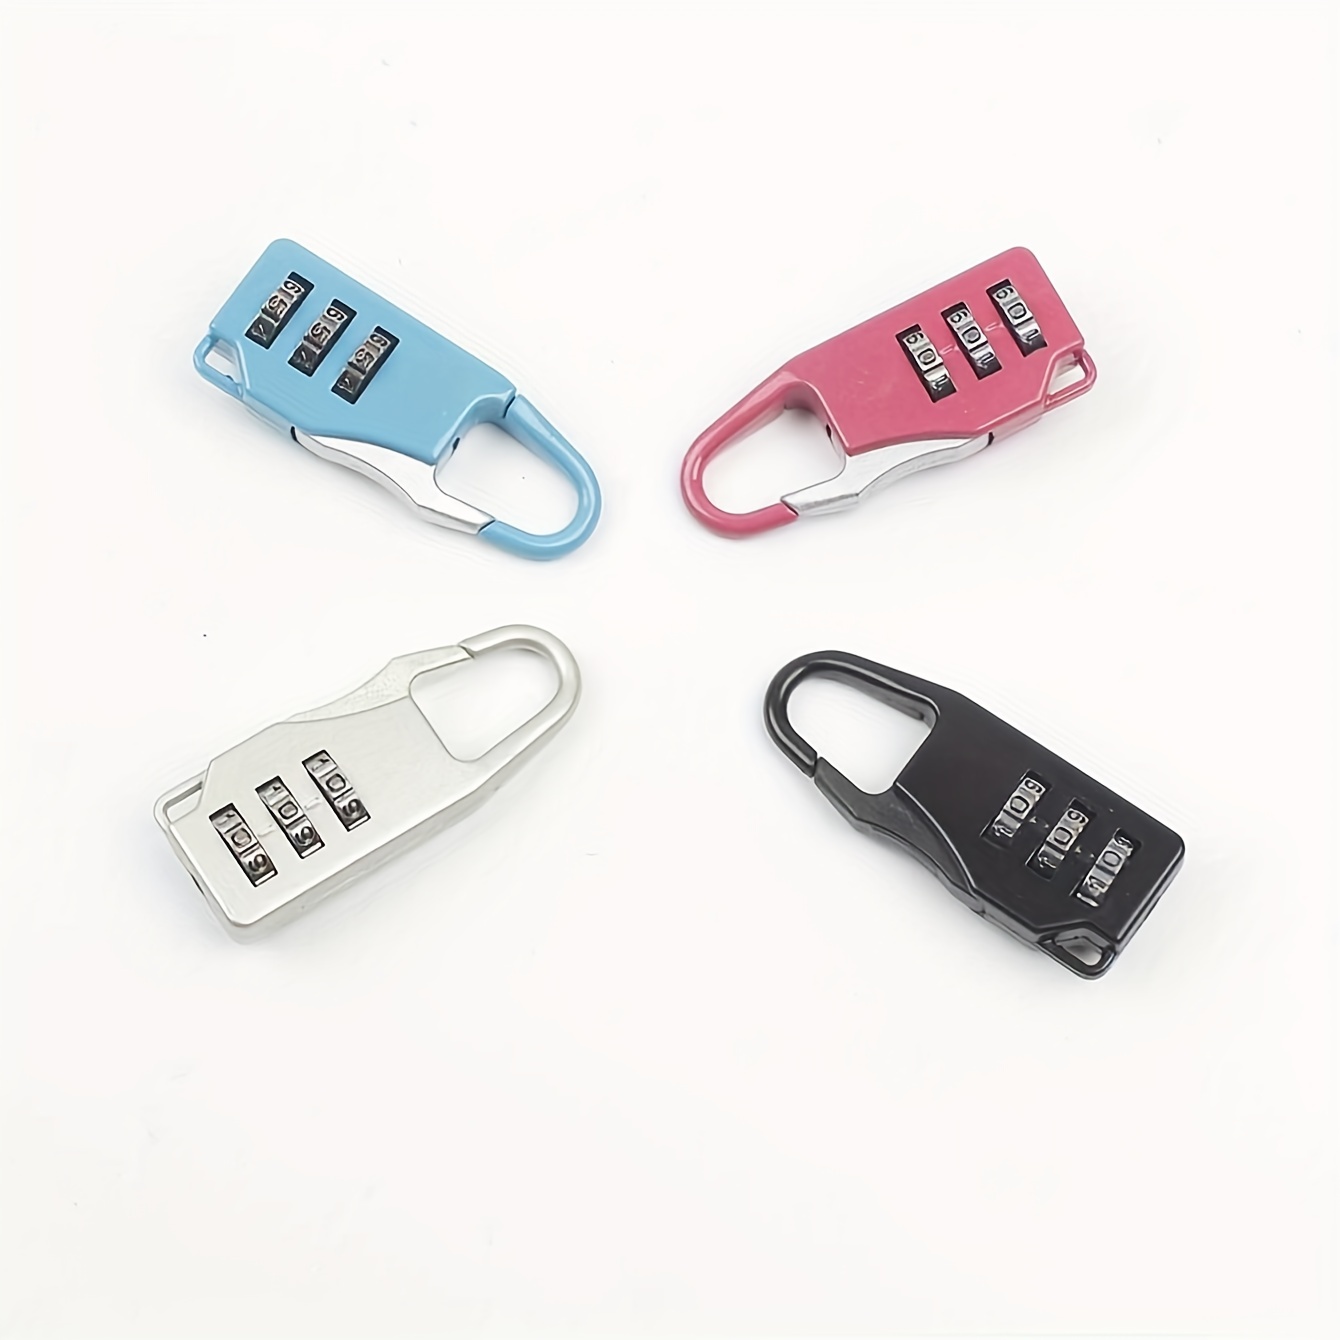 ZippGuard safety lock for zipper compartments keeps your belongings safe  and secure » Gadget Flow